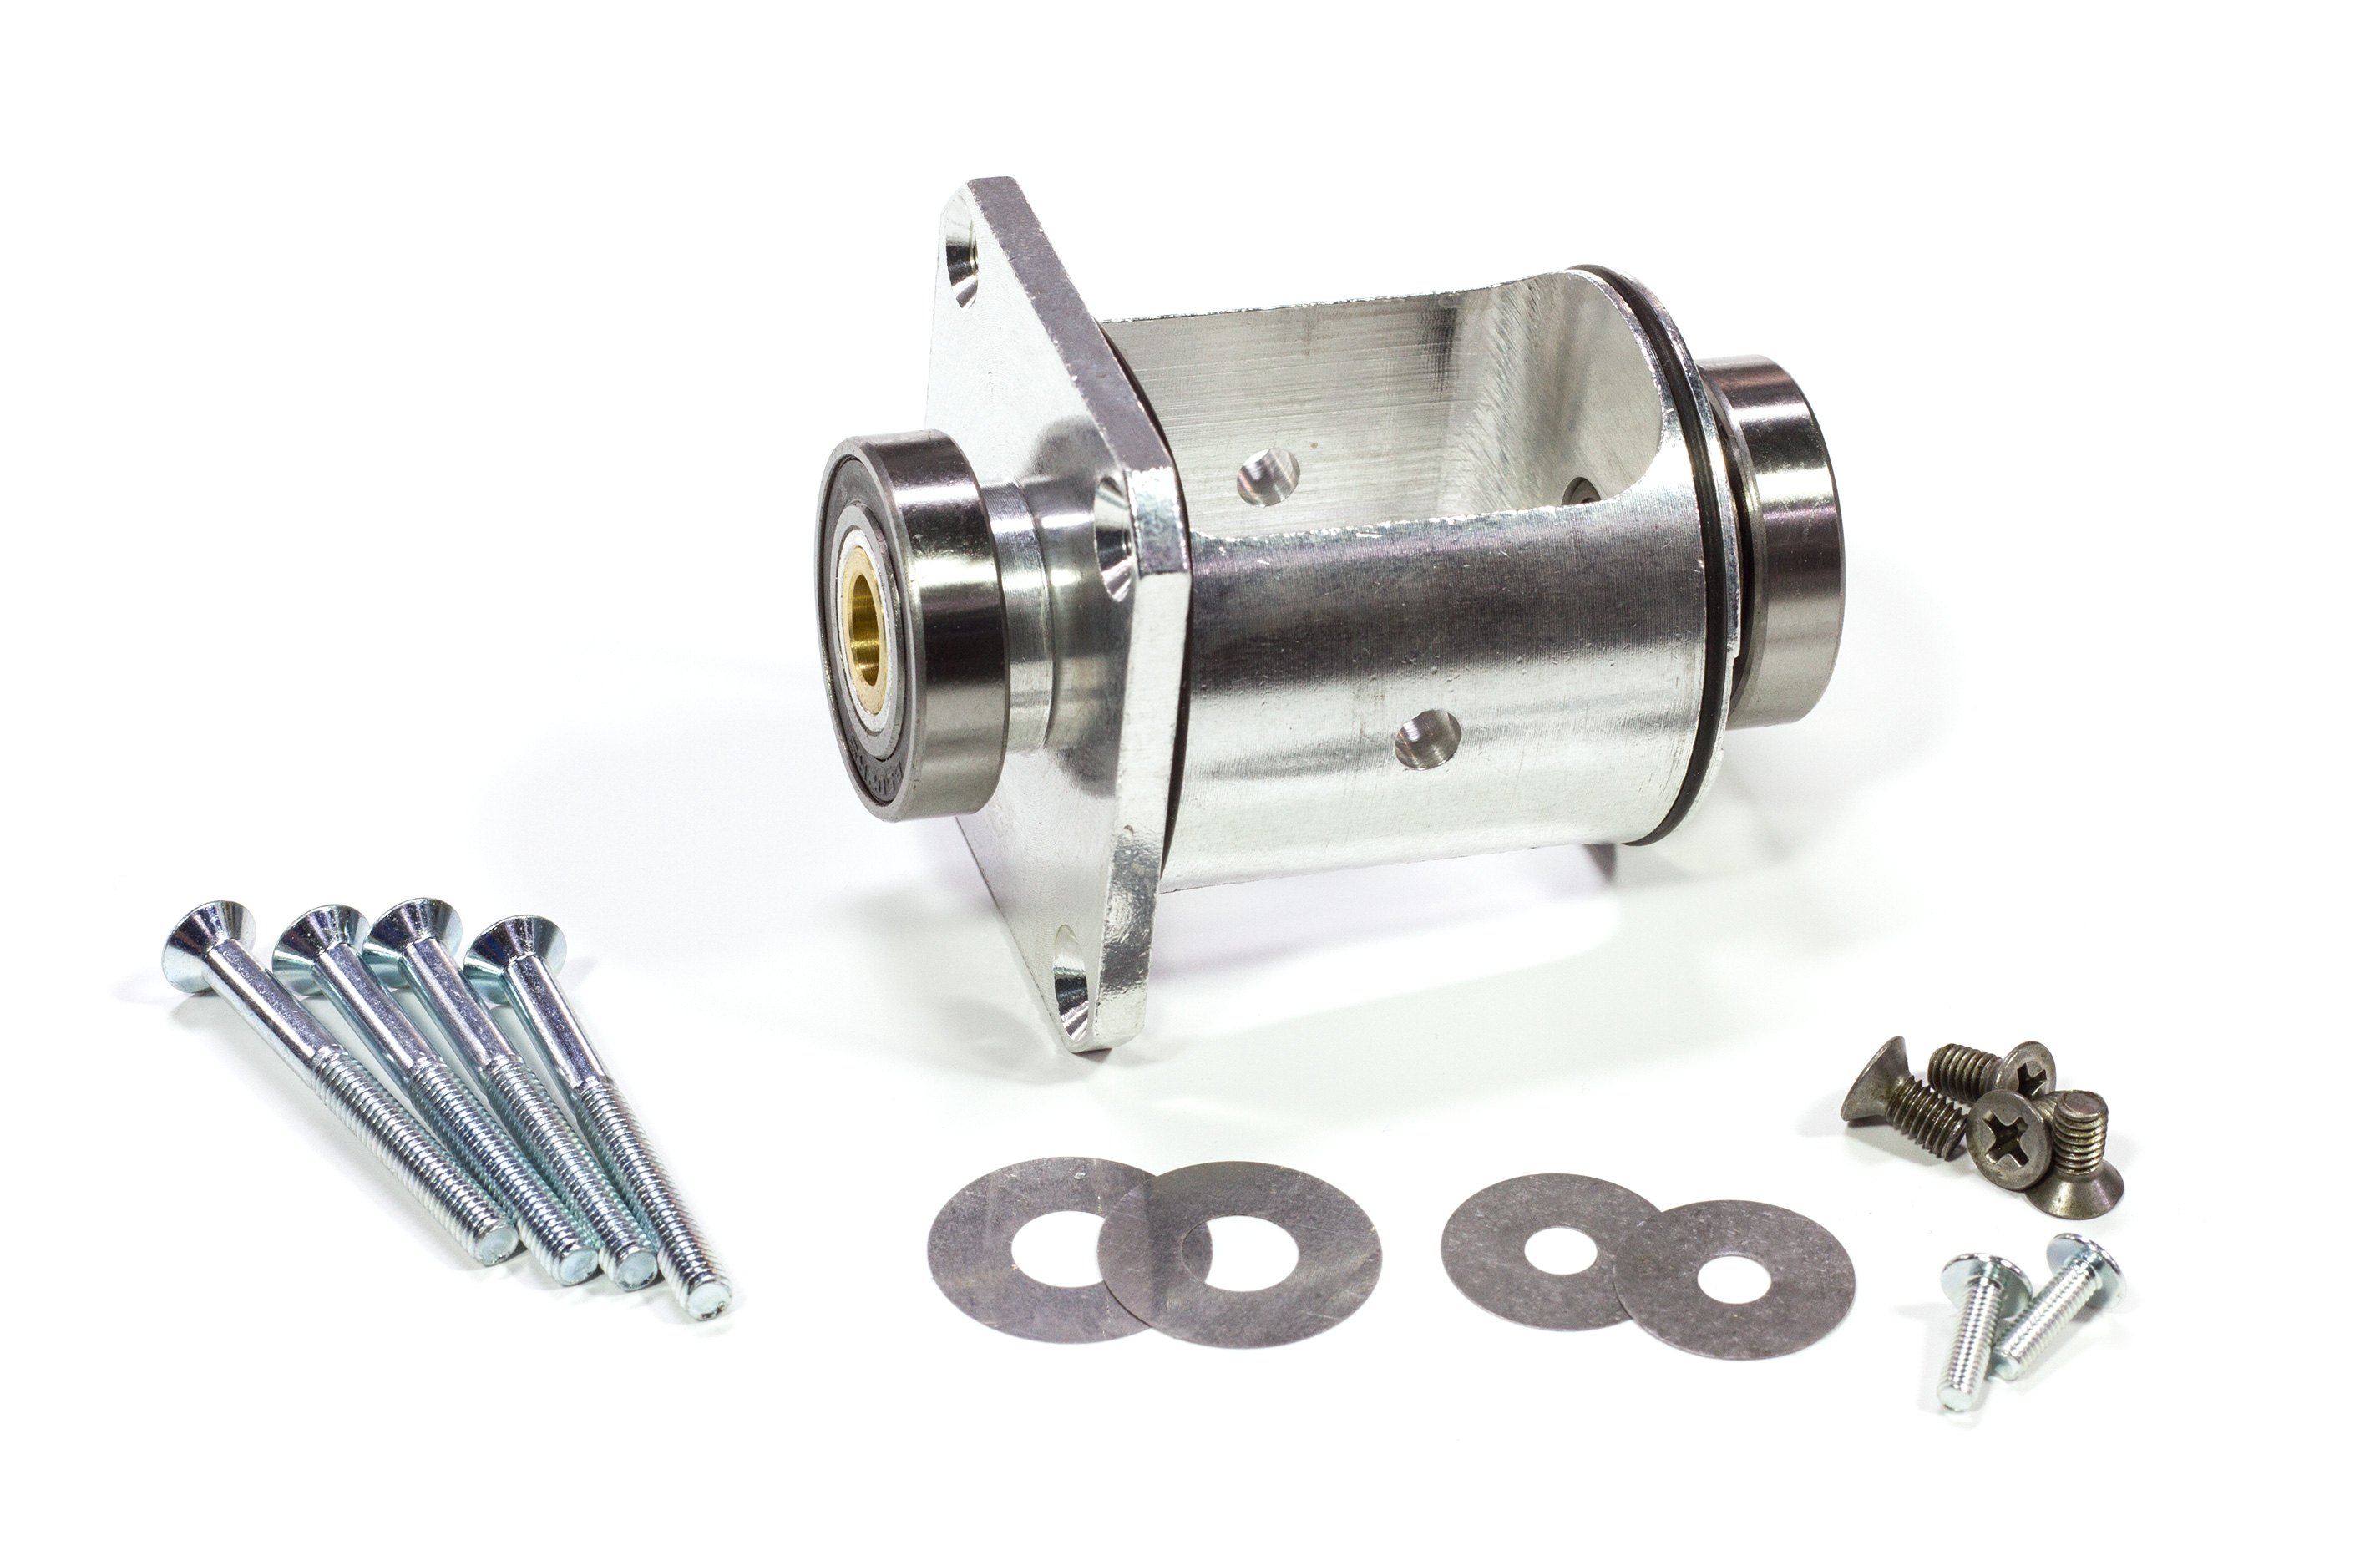 68405/01 FG Alloy differential 4WD conversion kit